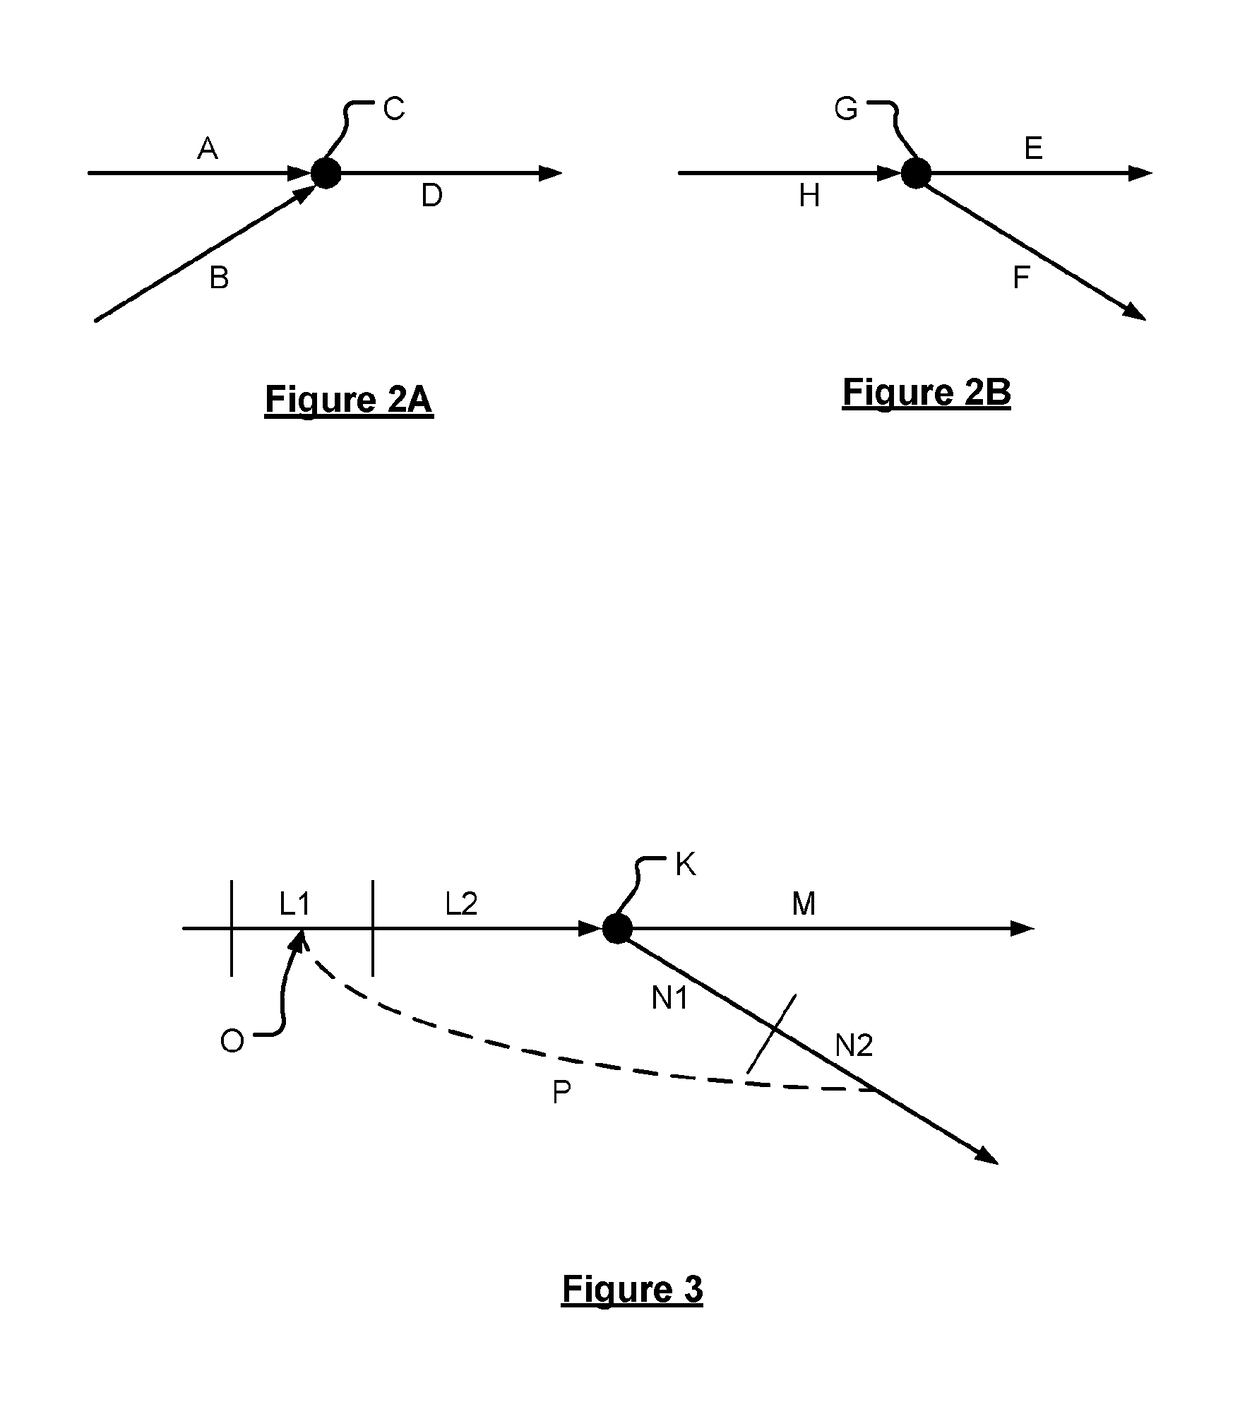 Methods and systems for detecting a closure of a navigable element